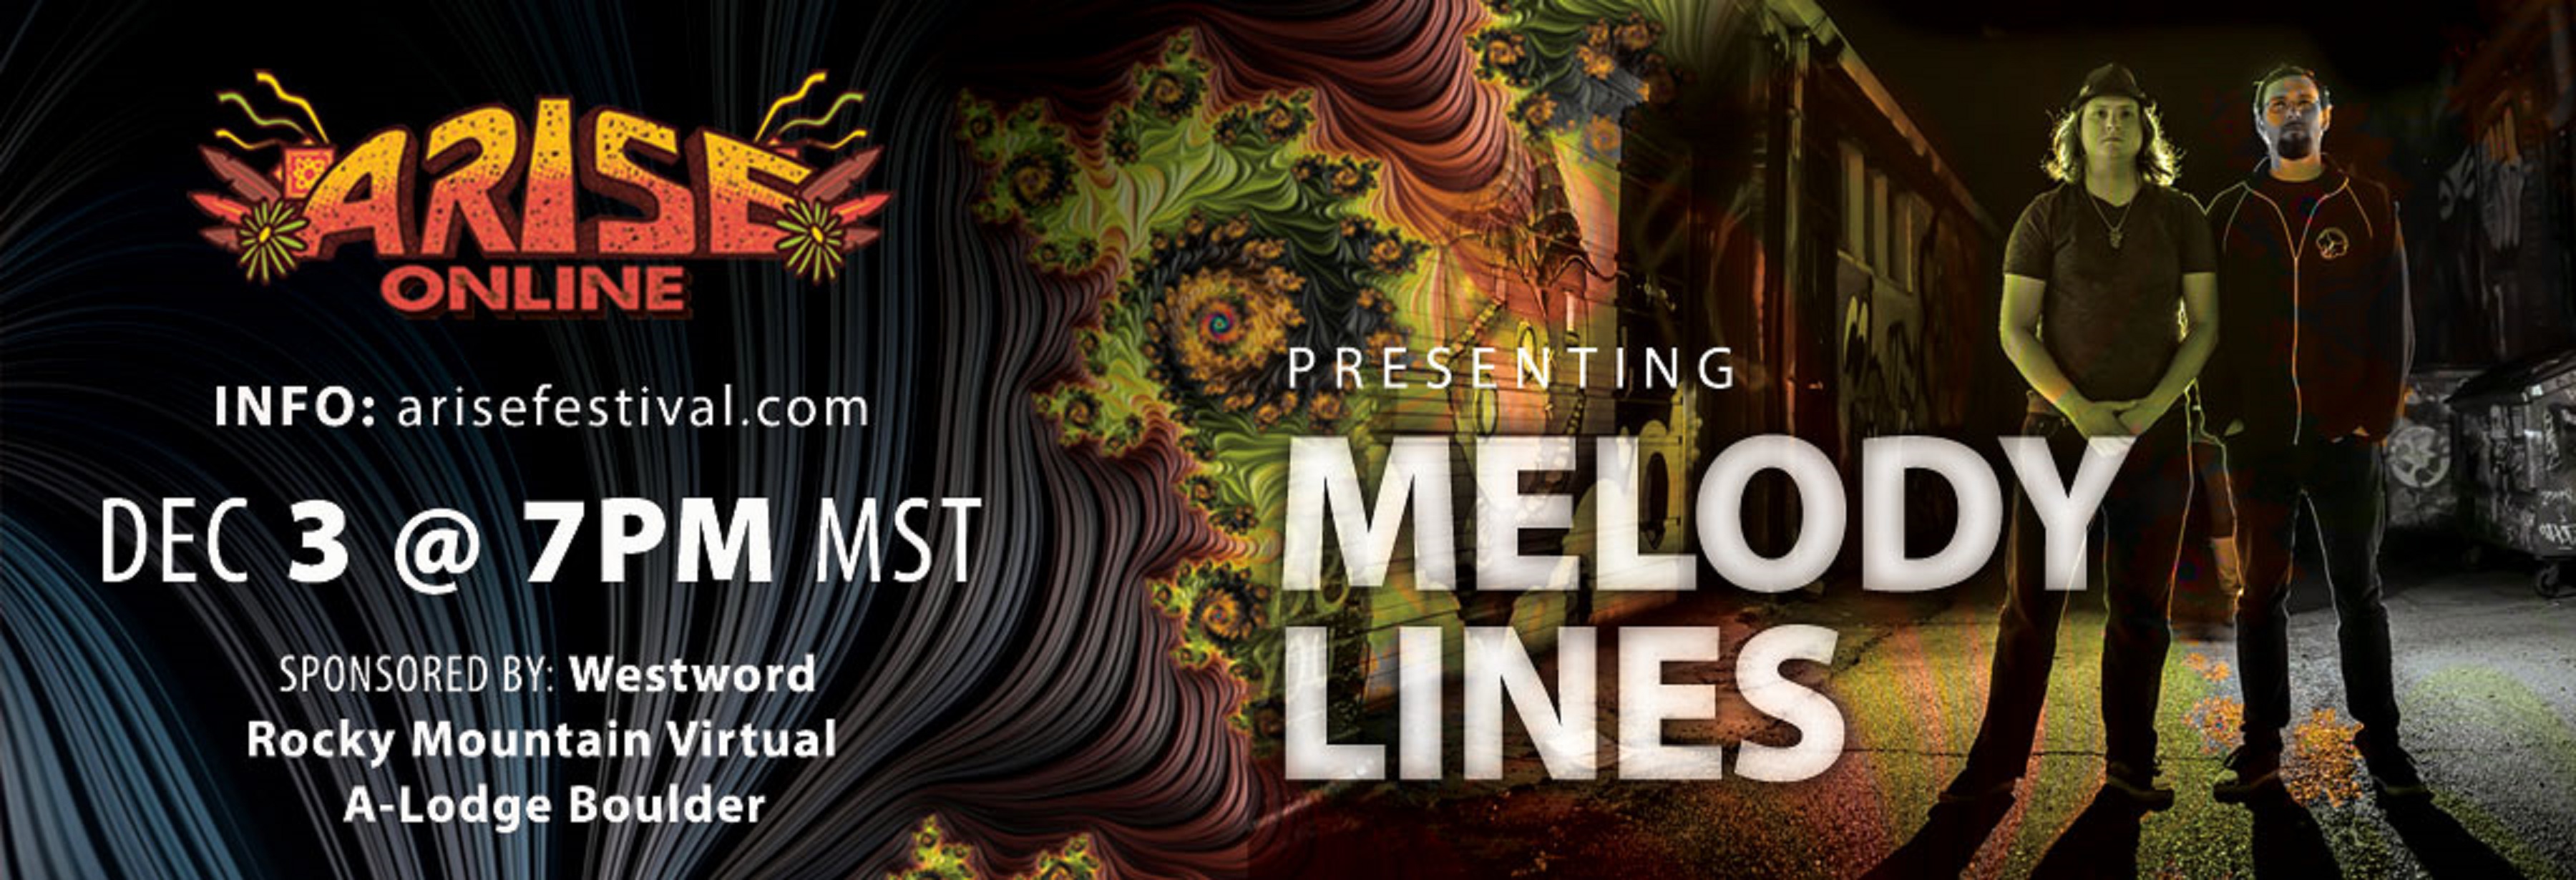 ARISE Online Continues Momentum with Melody Lines on December 3, 2020